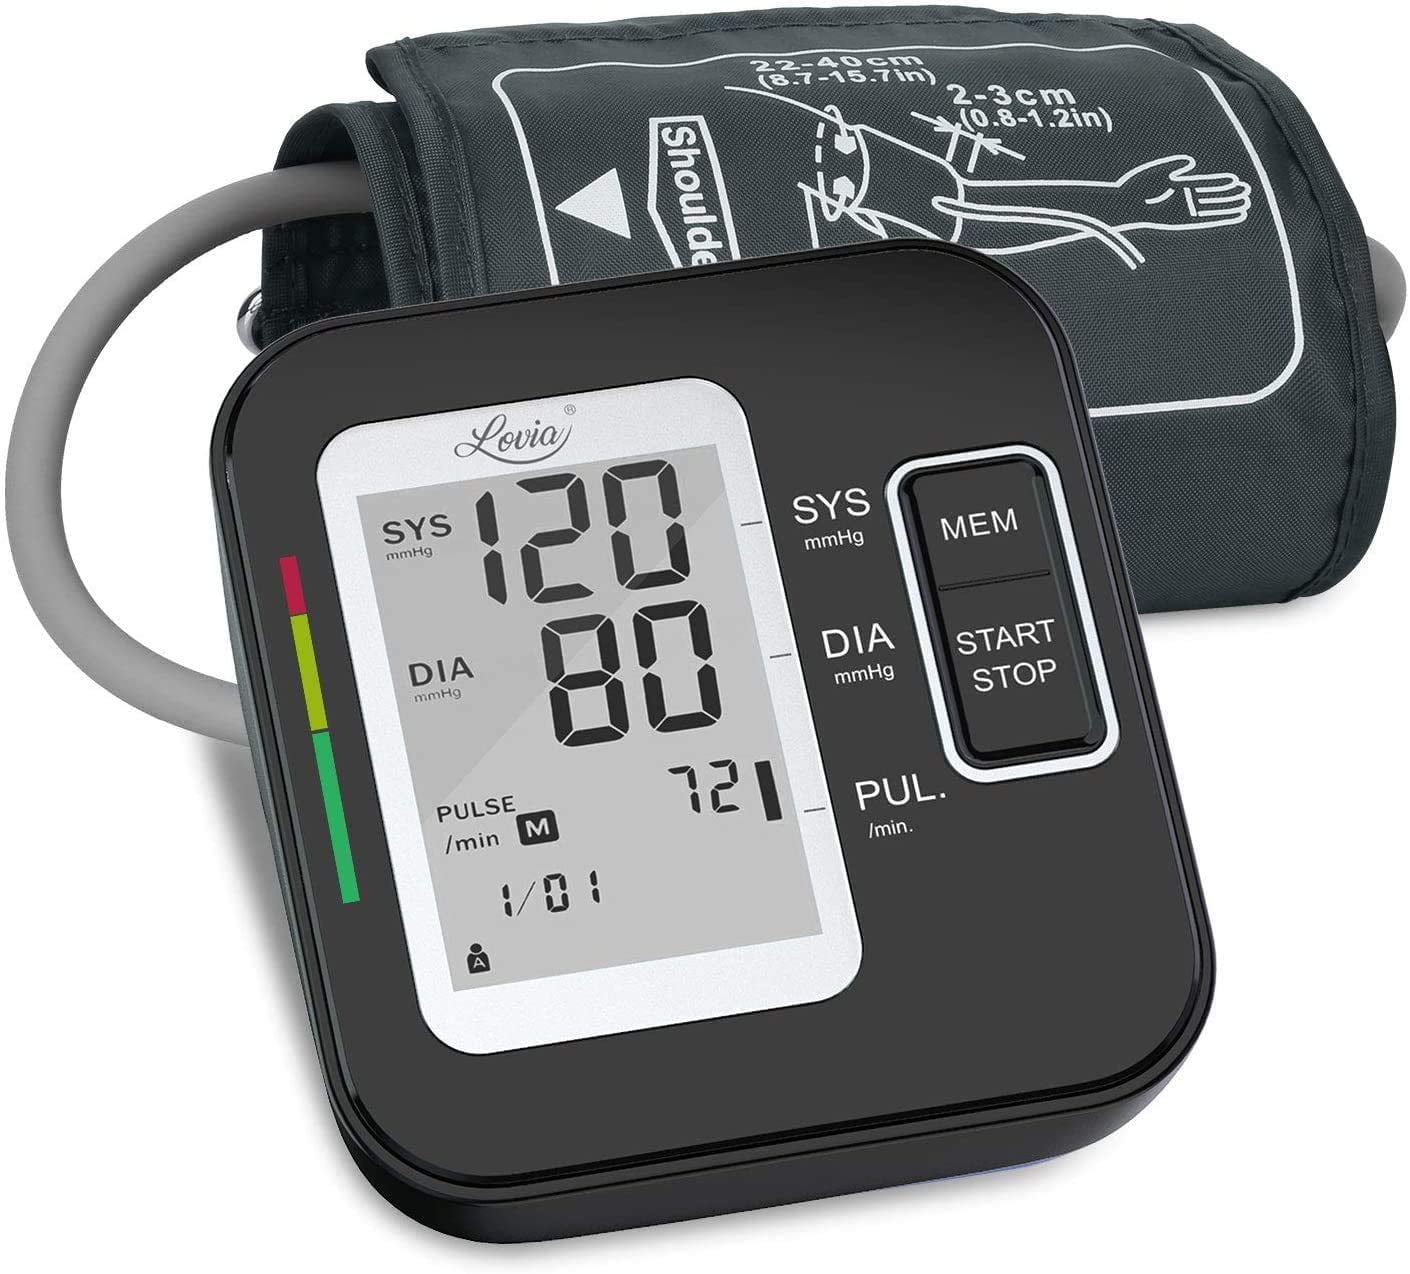 my home blood pressure monitor shows irregular heartbeat